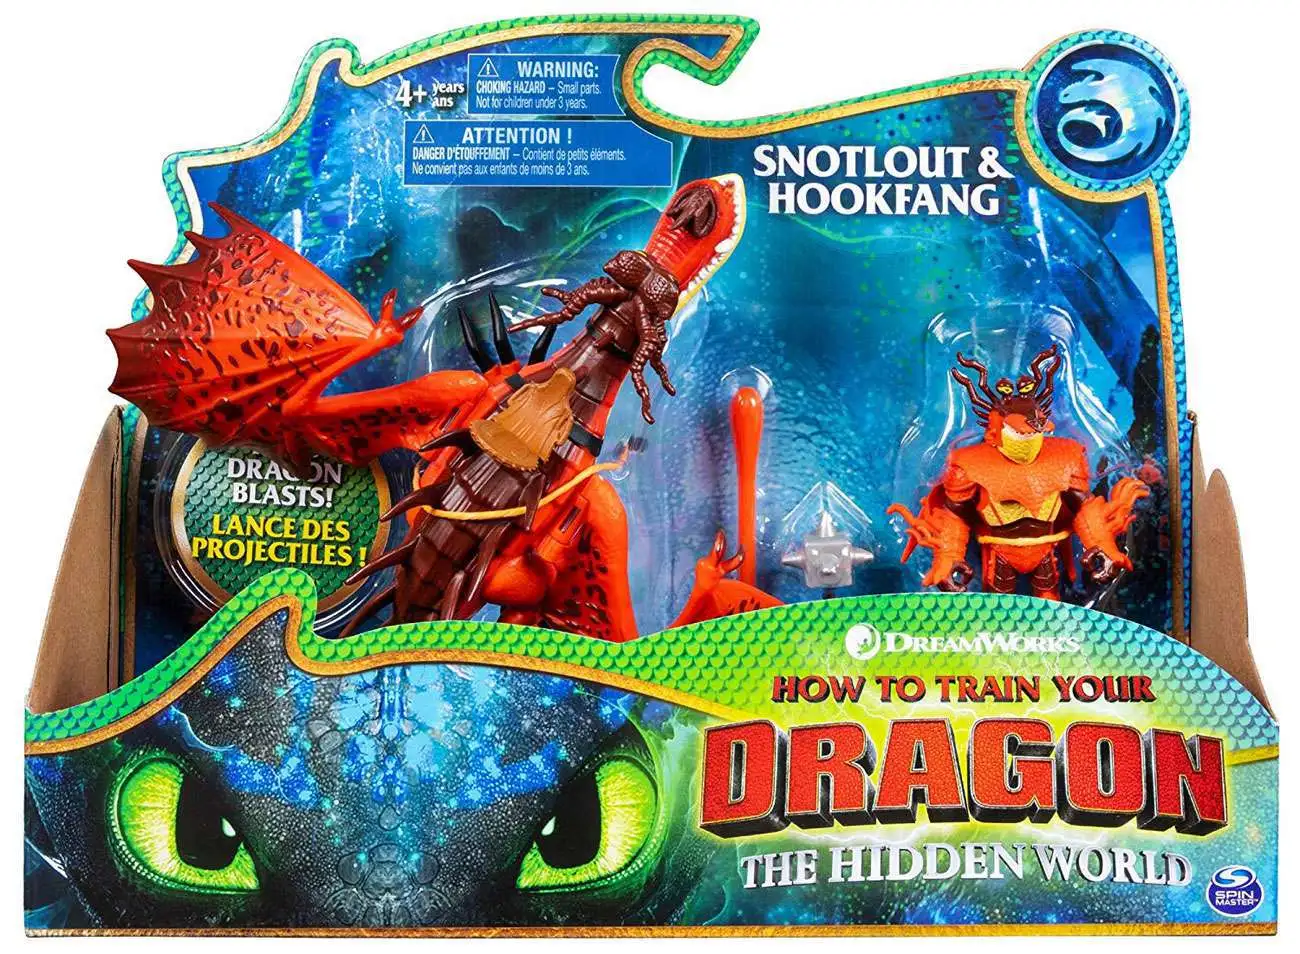 How To Train Your Dragon Hidden World Snotlout & Hookfang Action Figure Toy New 